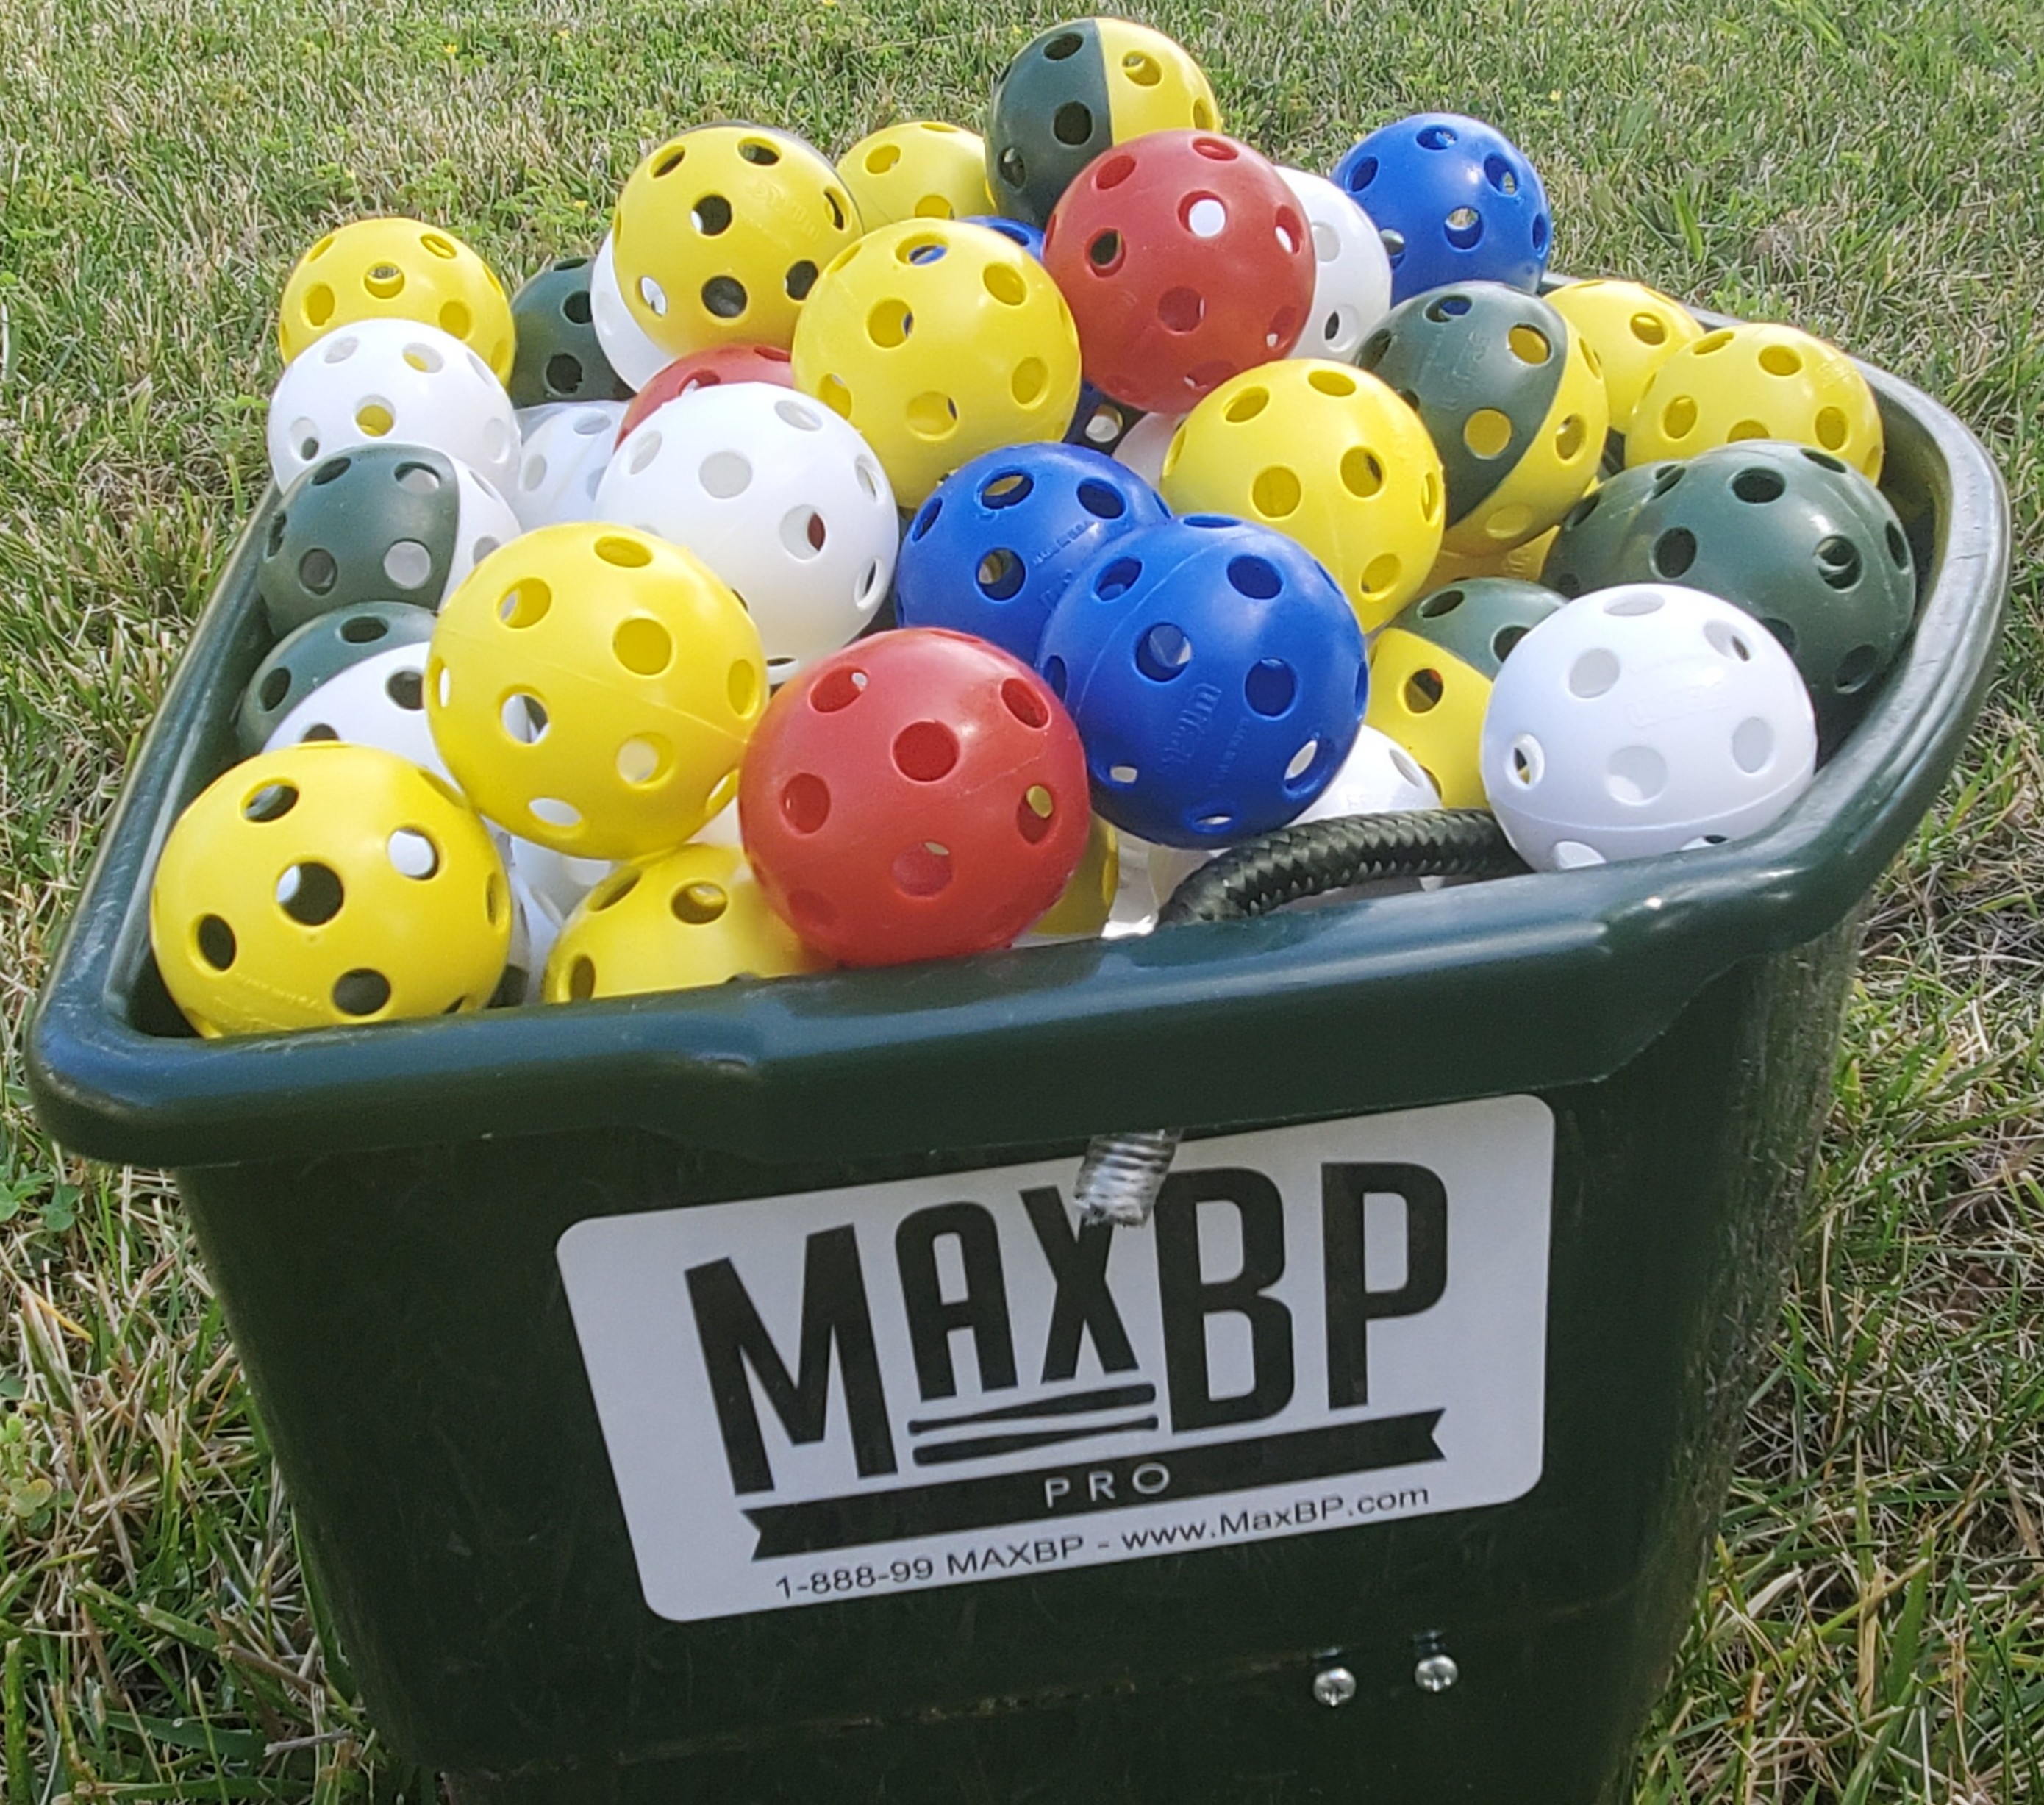 MaxBP Reaction Training is an excellent way for an athlete to fine tune their vision and hand eye coordination through its small ball practices.